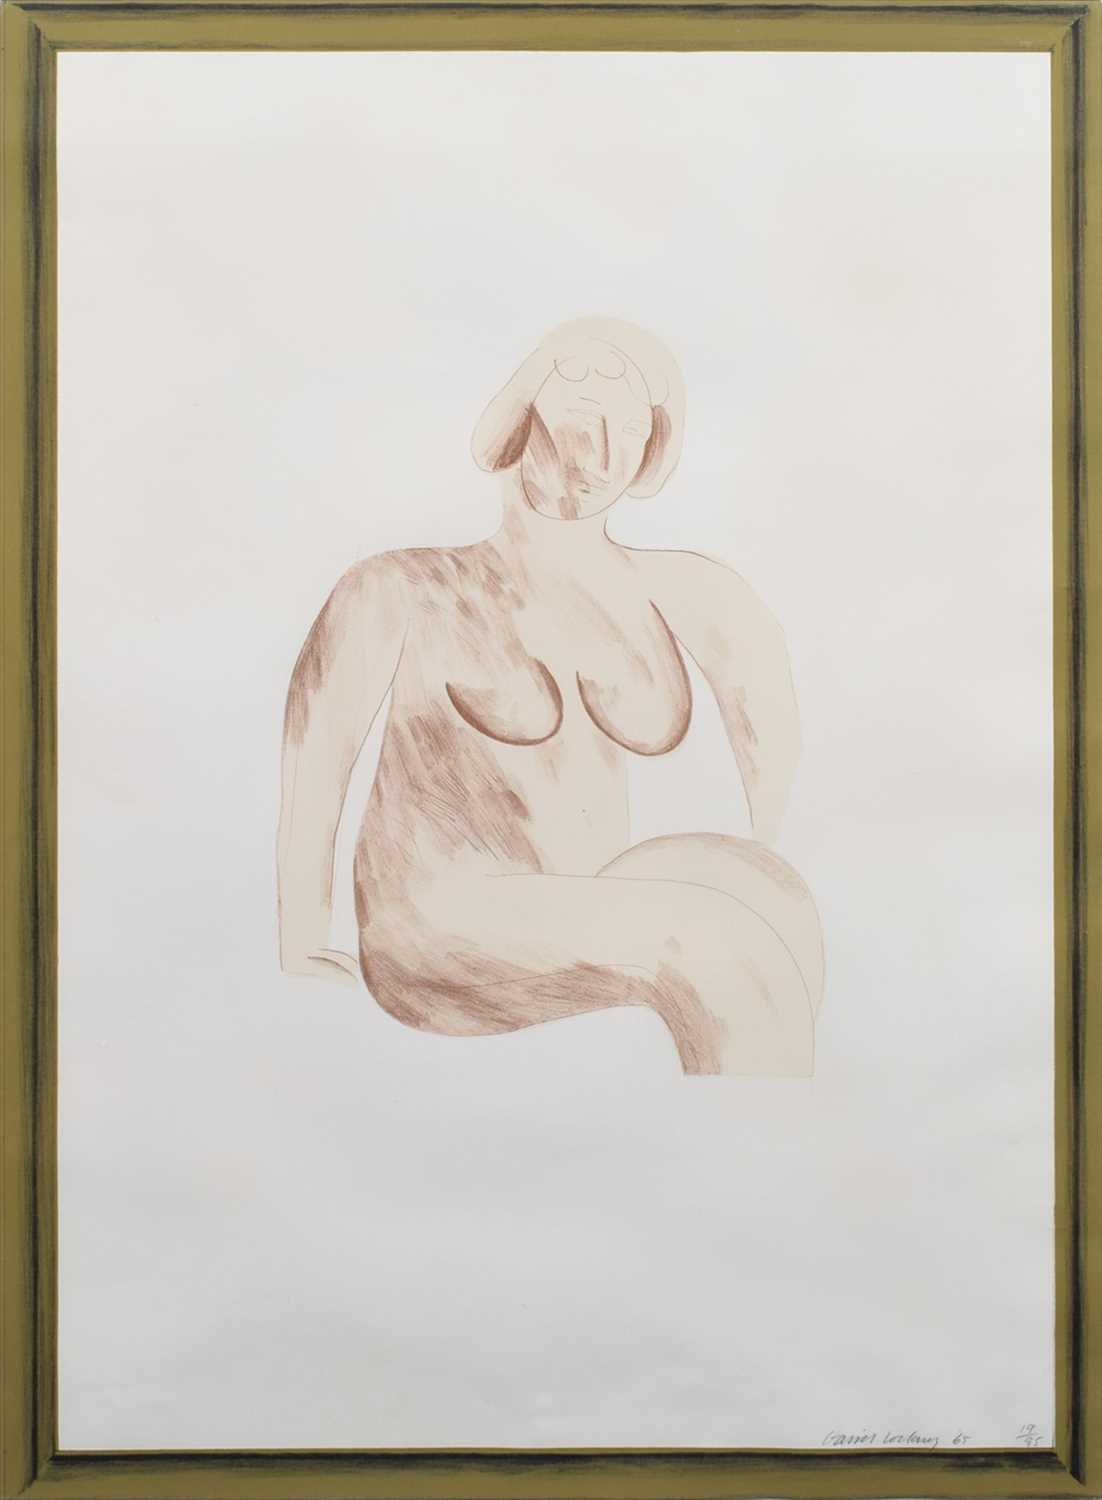 224 - David Hockney, "Picture of a Simple Framed Traditional Nude Drawing", signed lithograph.